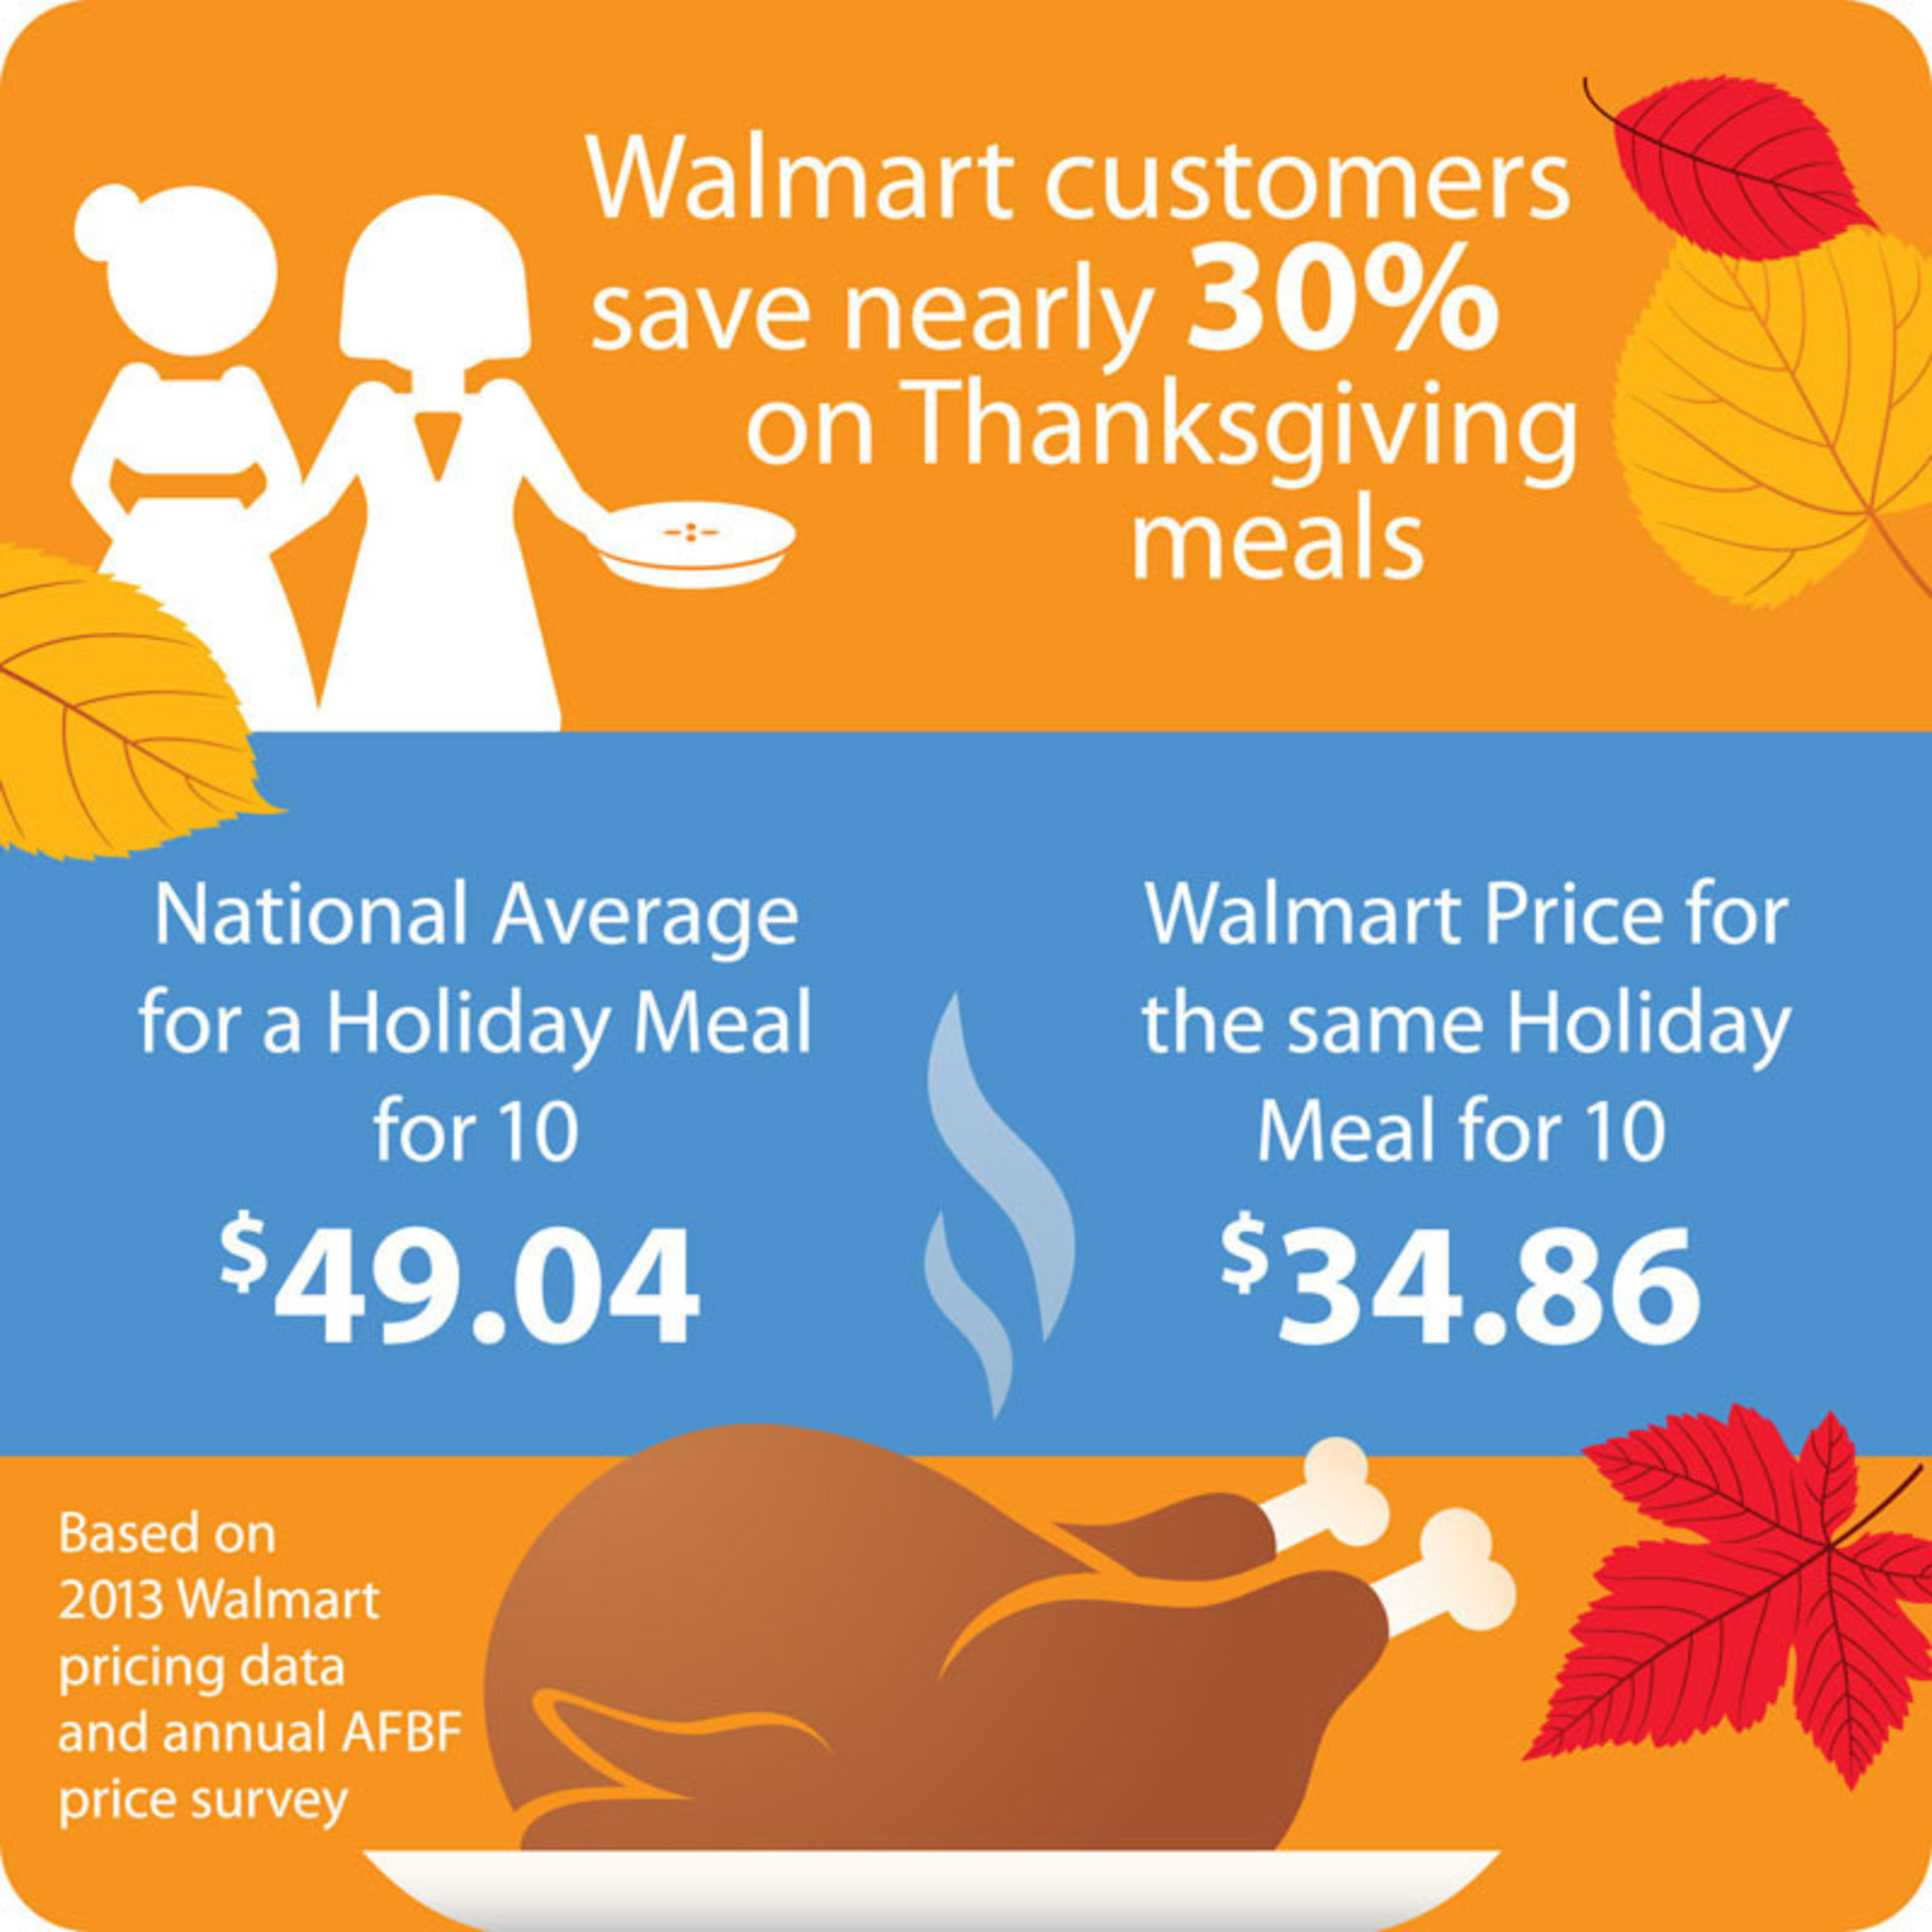 Walmart Shoppers Save Nearly 30% on Thanksgiving Meal Compared to National Average. (PRNewsFoto/Walmart) (PRNewsFoto/WALMART)